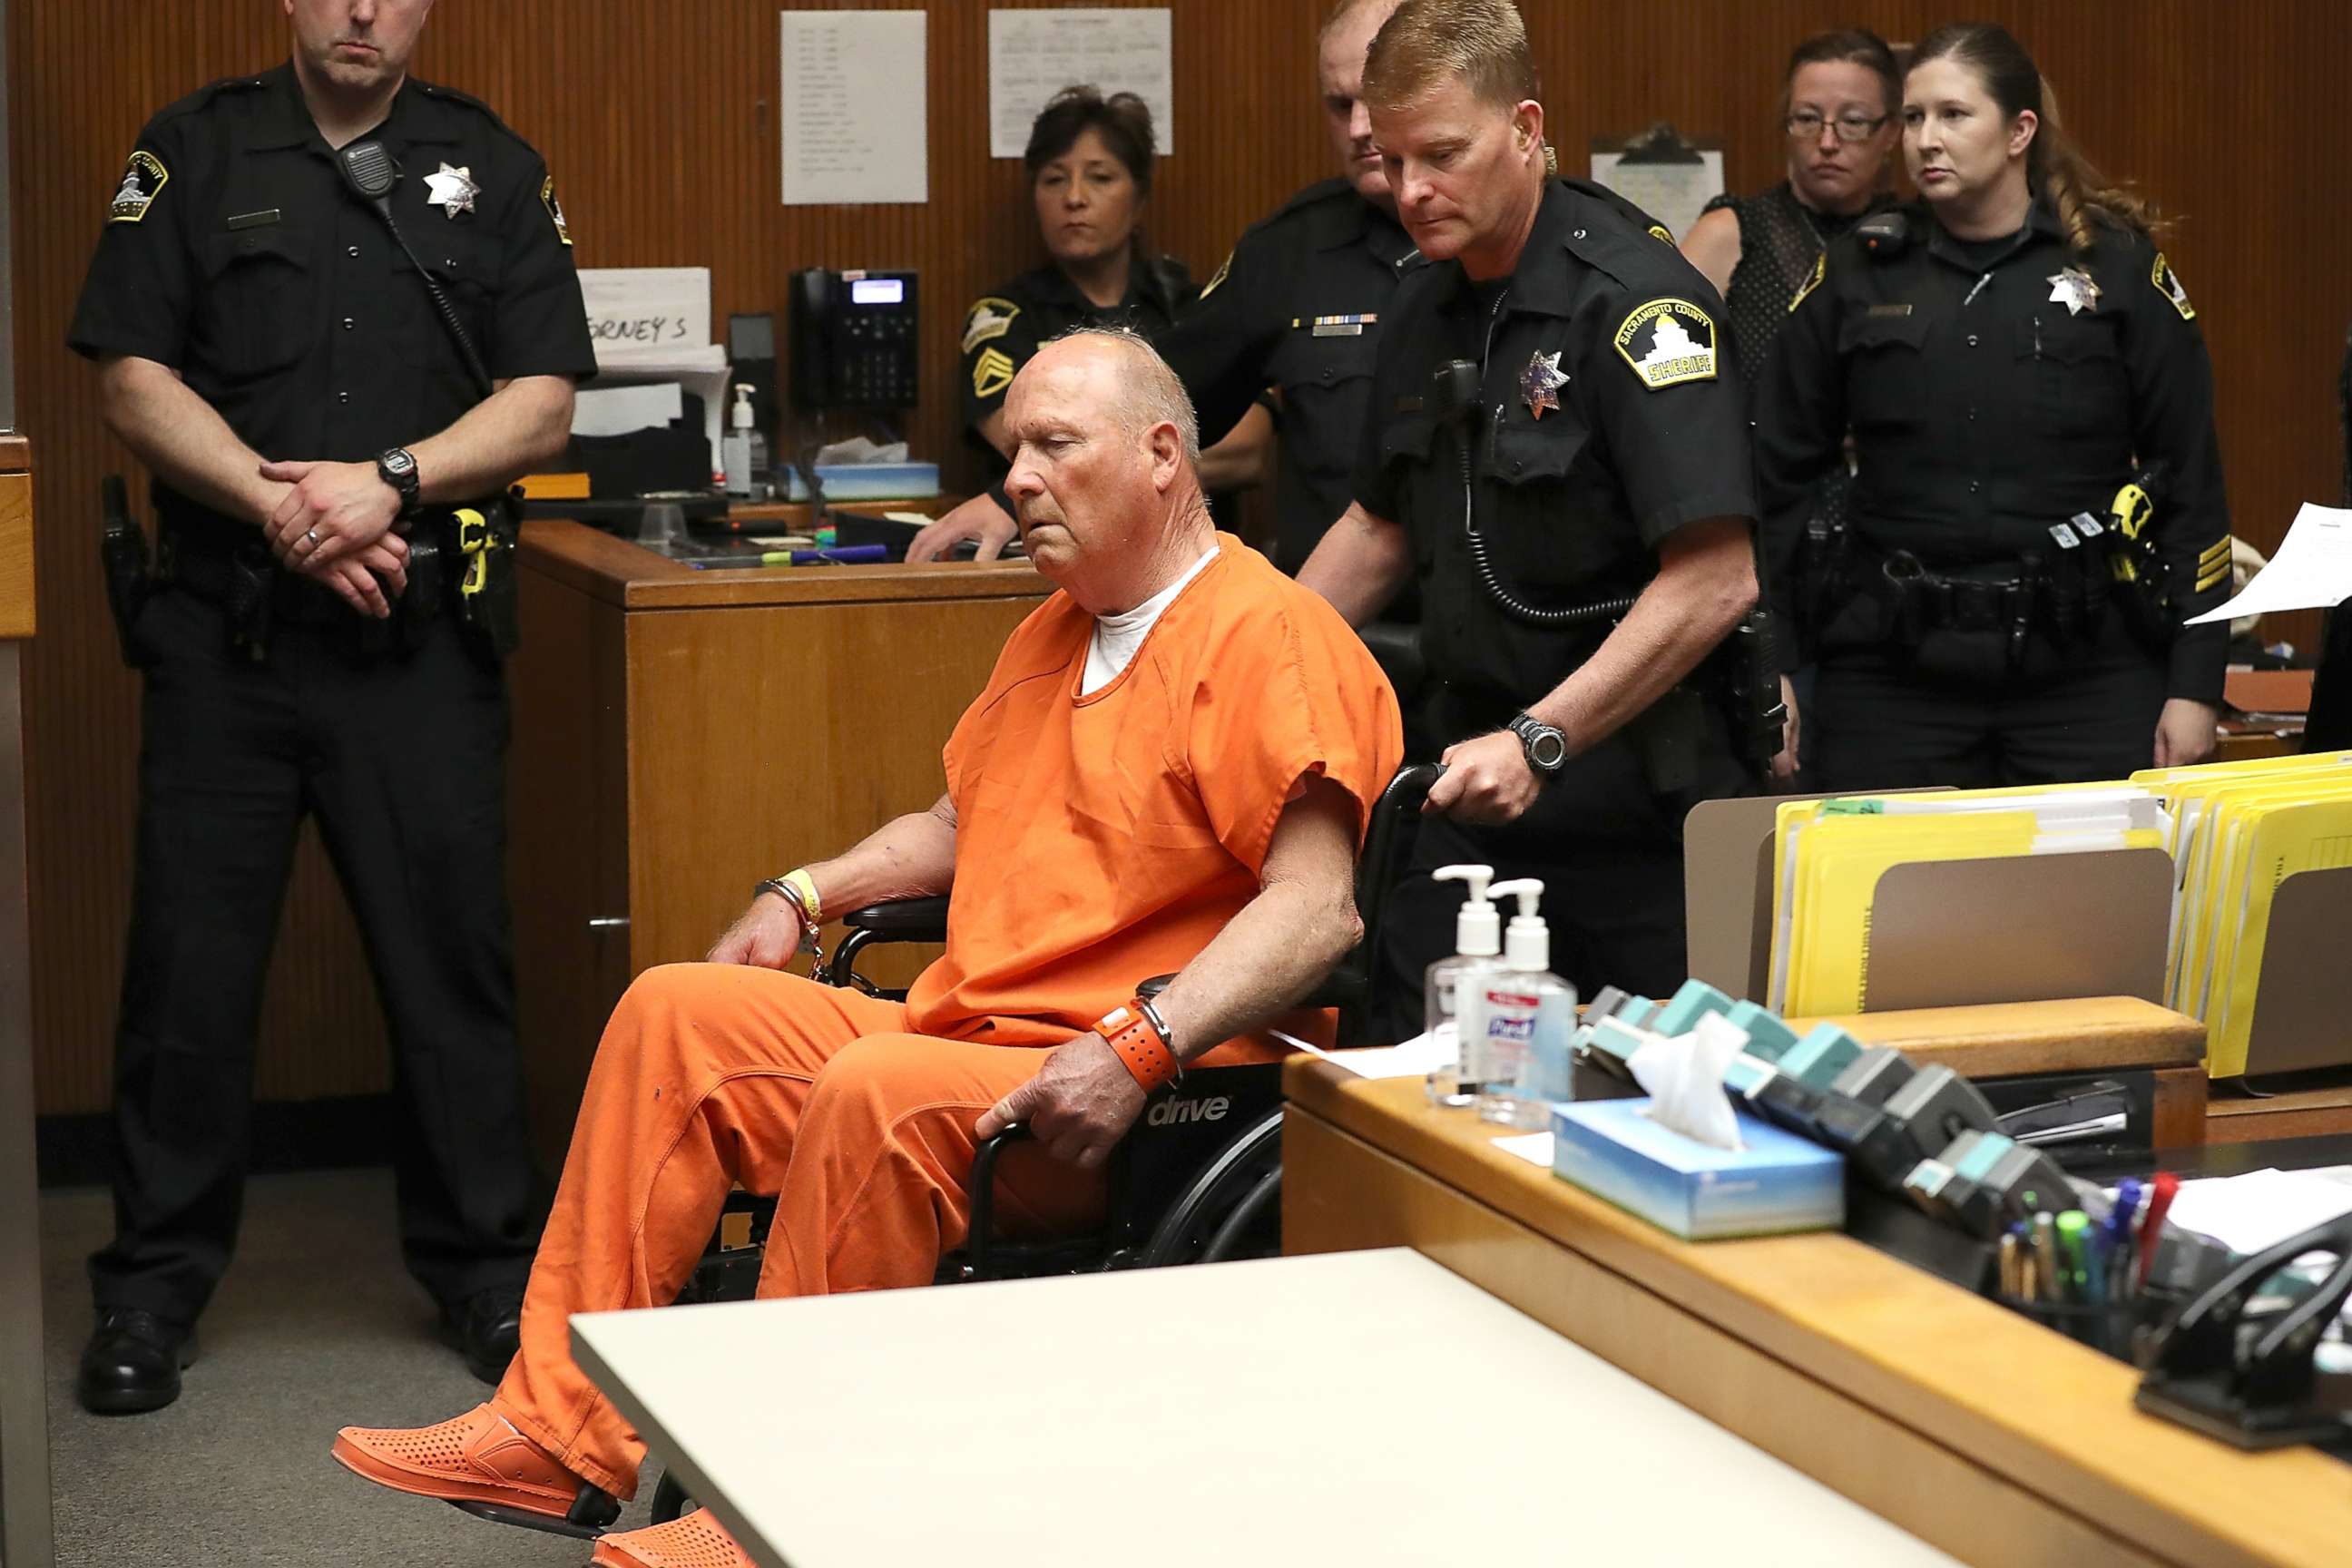 PHOTO: Joseph James DeAngelo, the suspected "Golden State Killer", appears in court for his arraignment on April 27, 2018 in Sacramento, Calif.